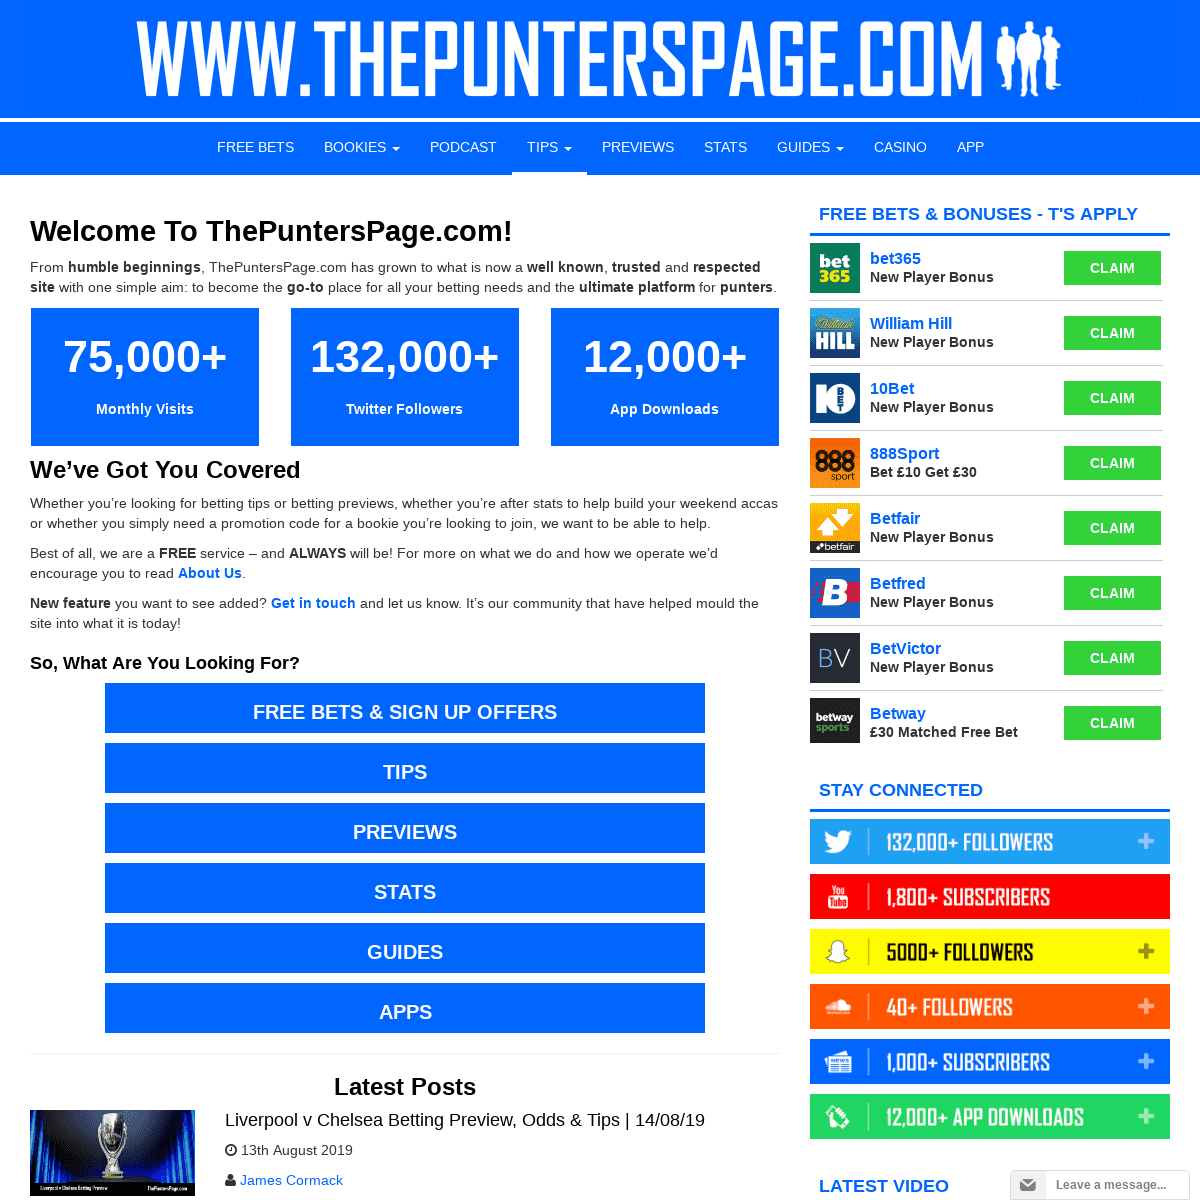 Your Go-To Site For All Things Betting - ThePuntersPage.com